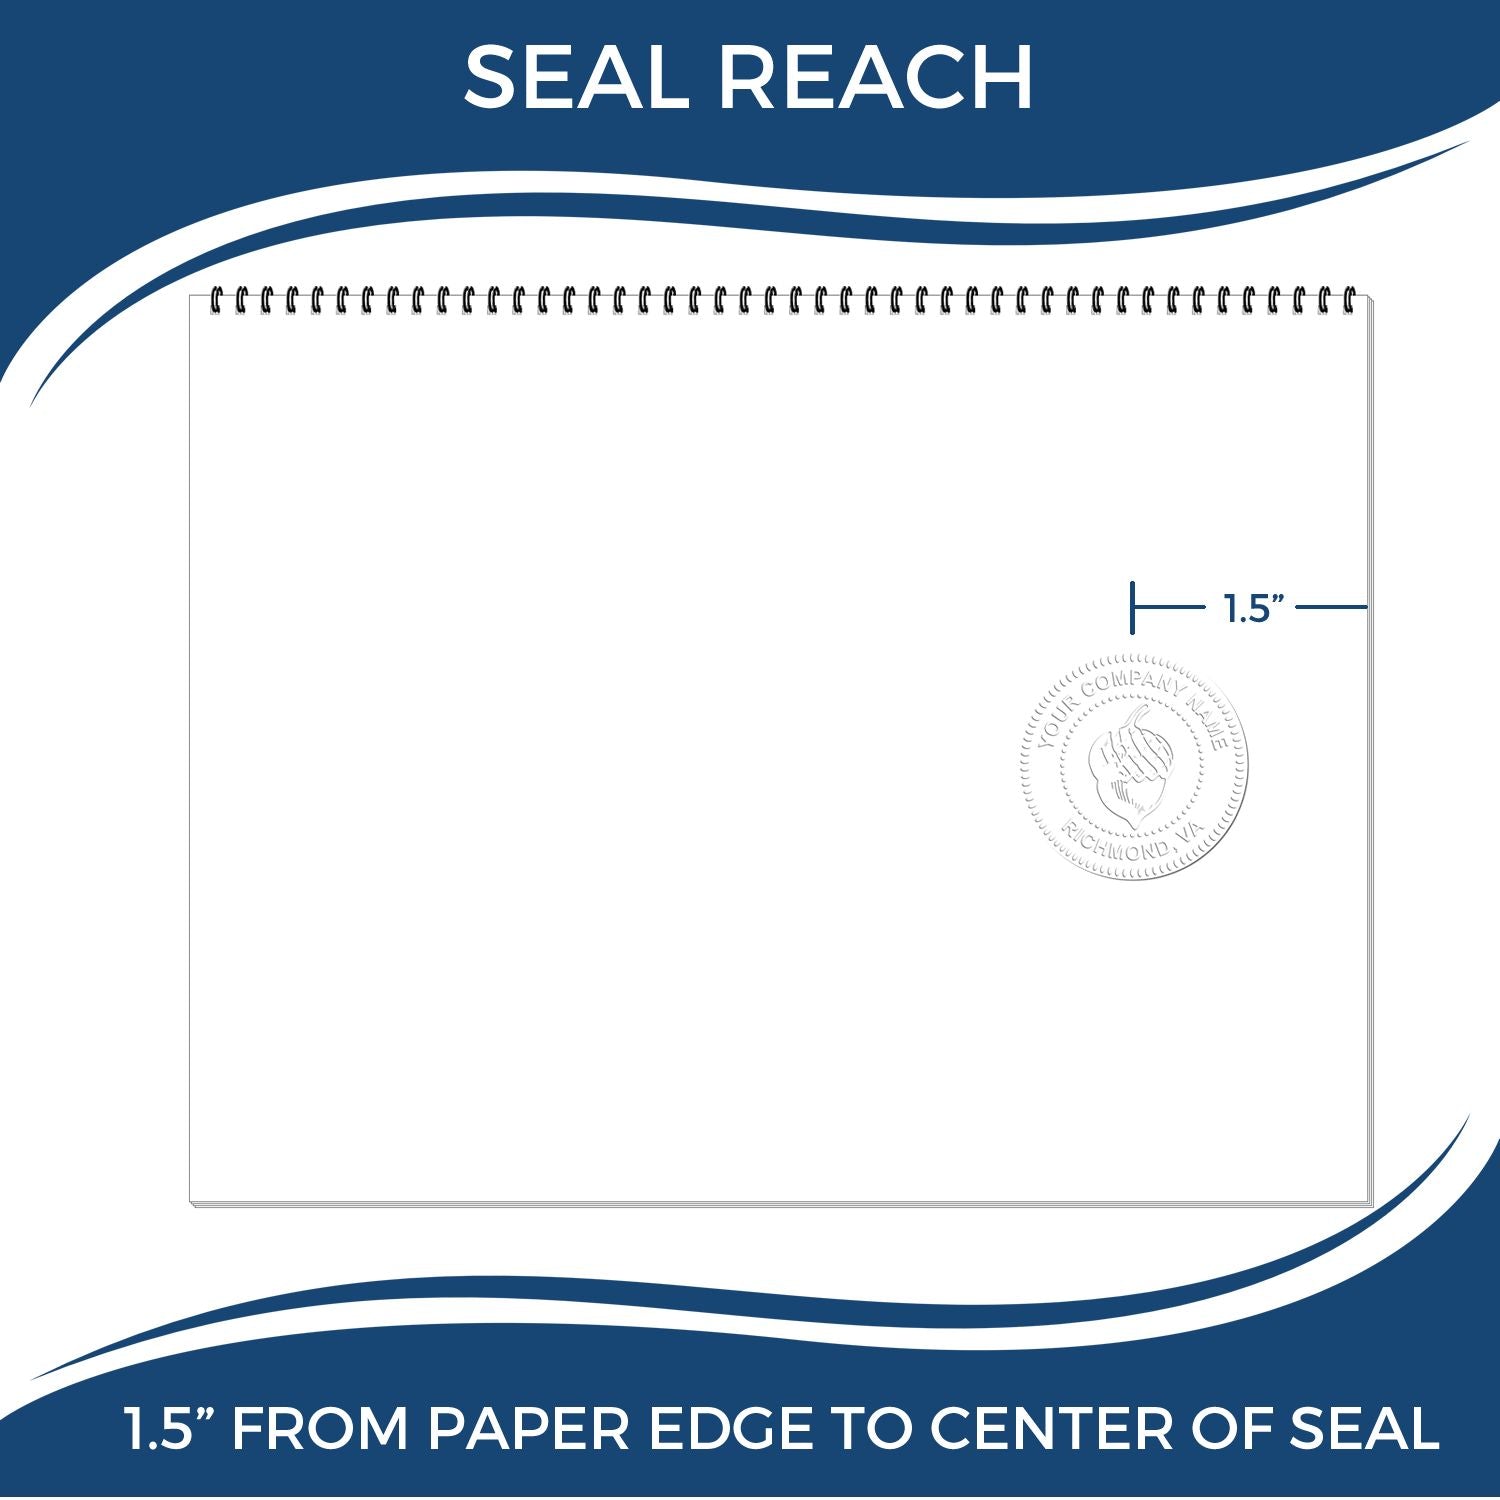 An infographic showing the seal reach which is represented by a ruler and a miniature seal image of the State of North Carolina Architectural Seal Embosser